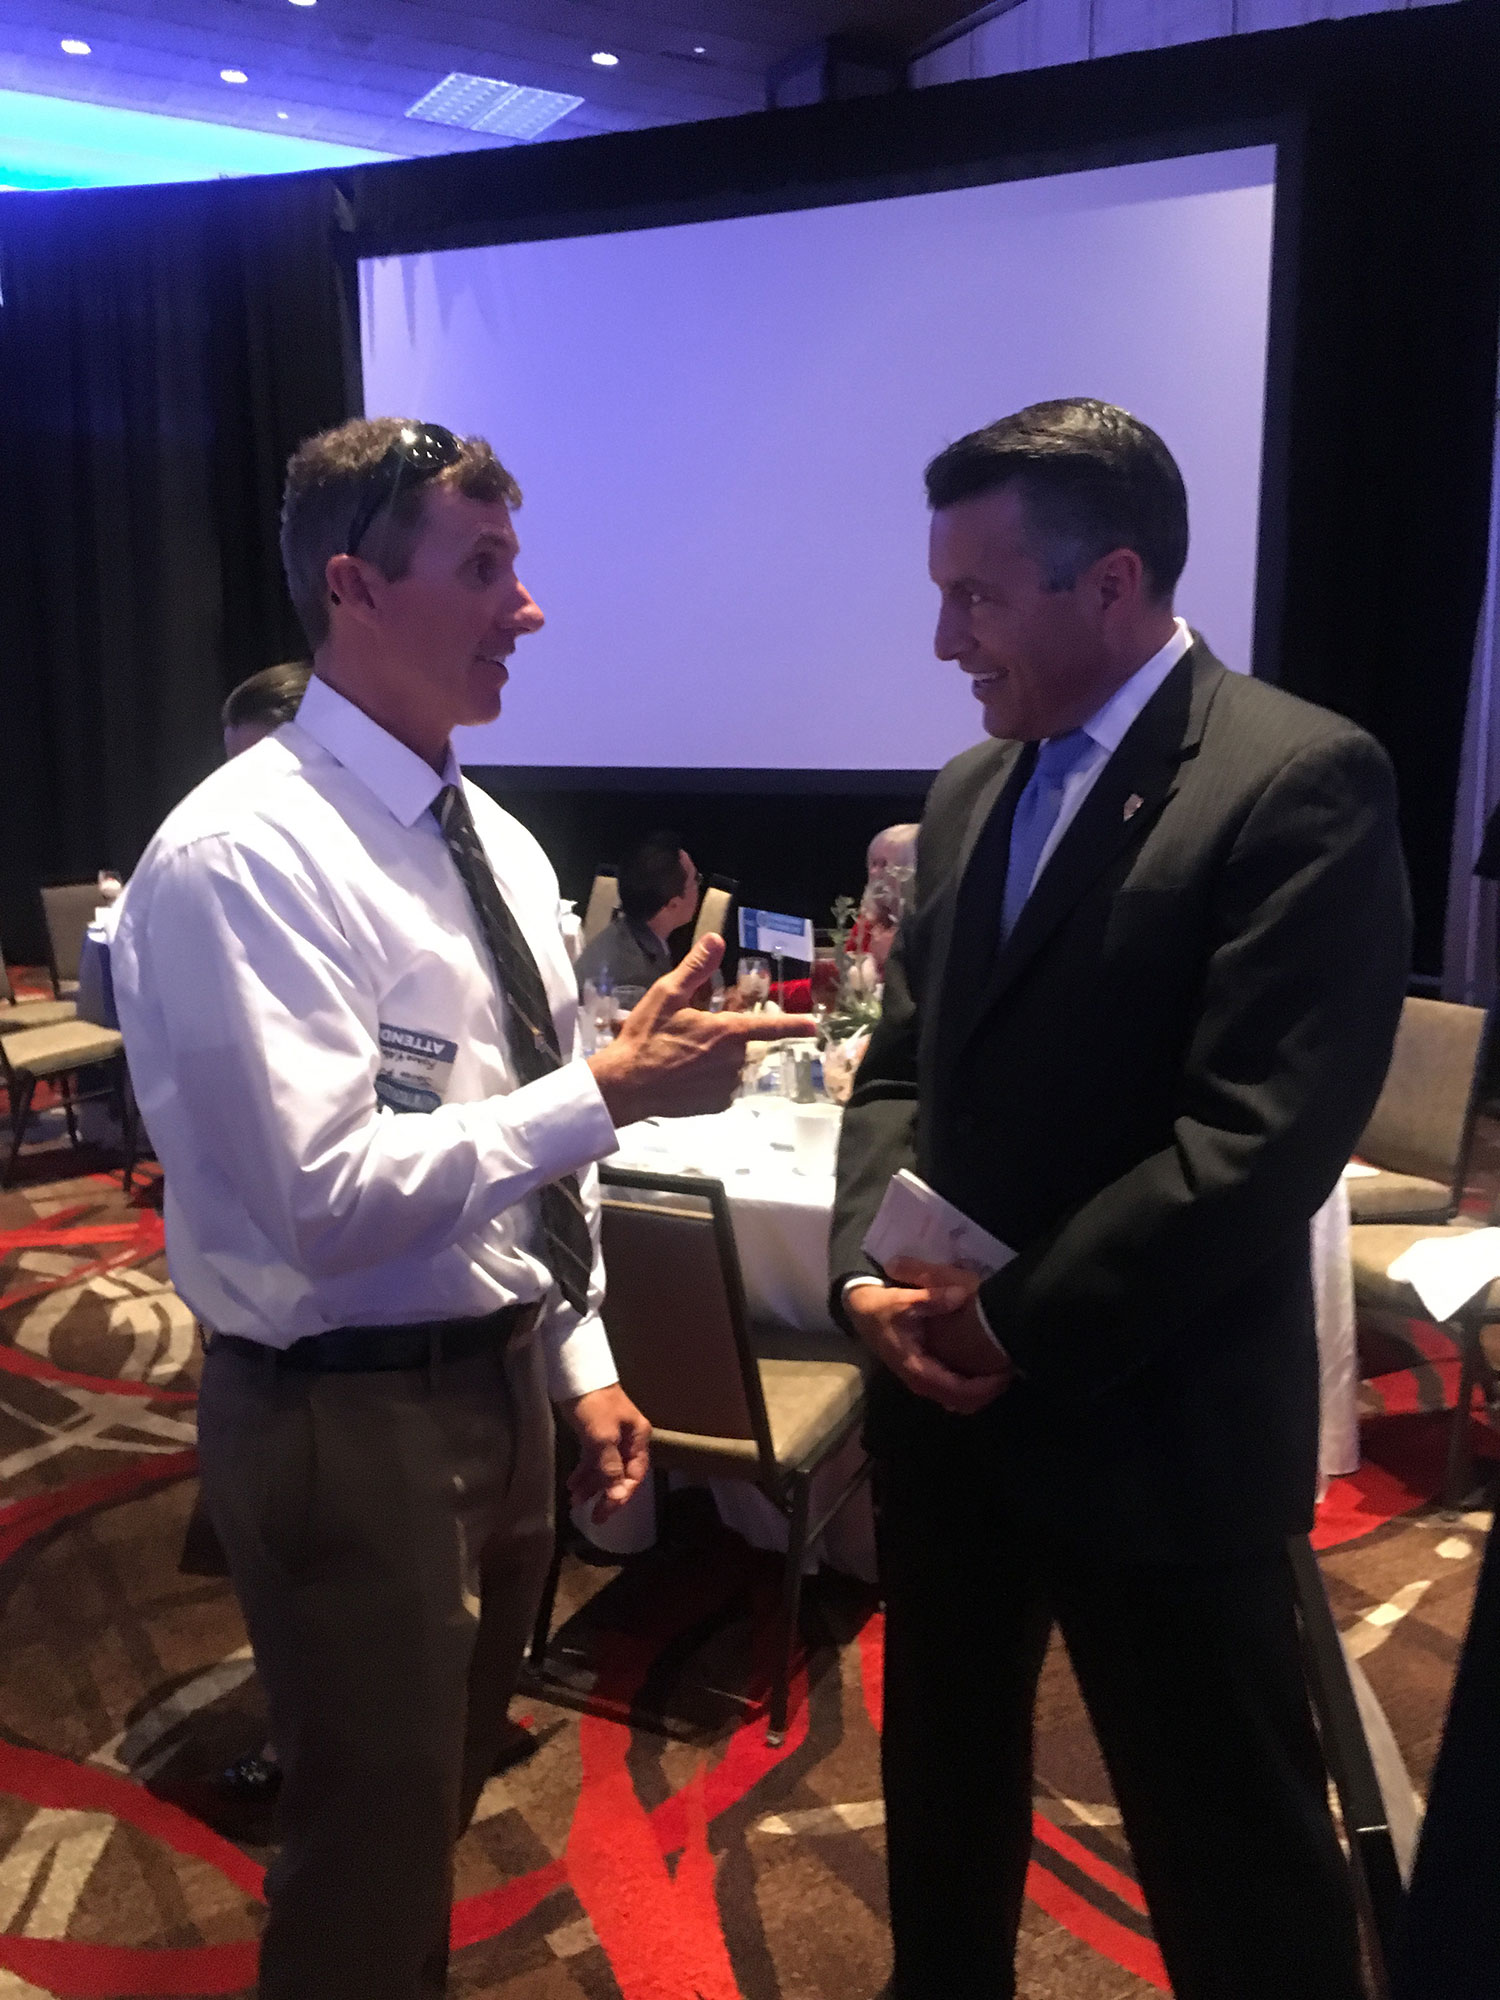 Jared meeting with governor Sandoval